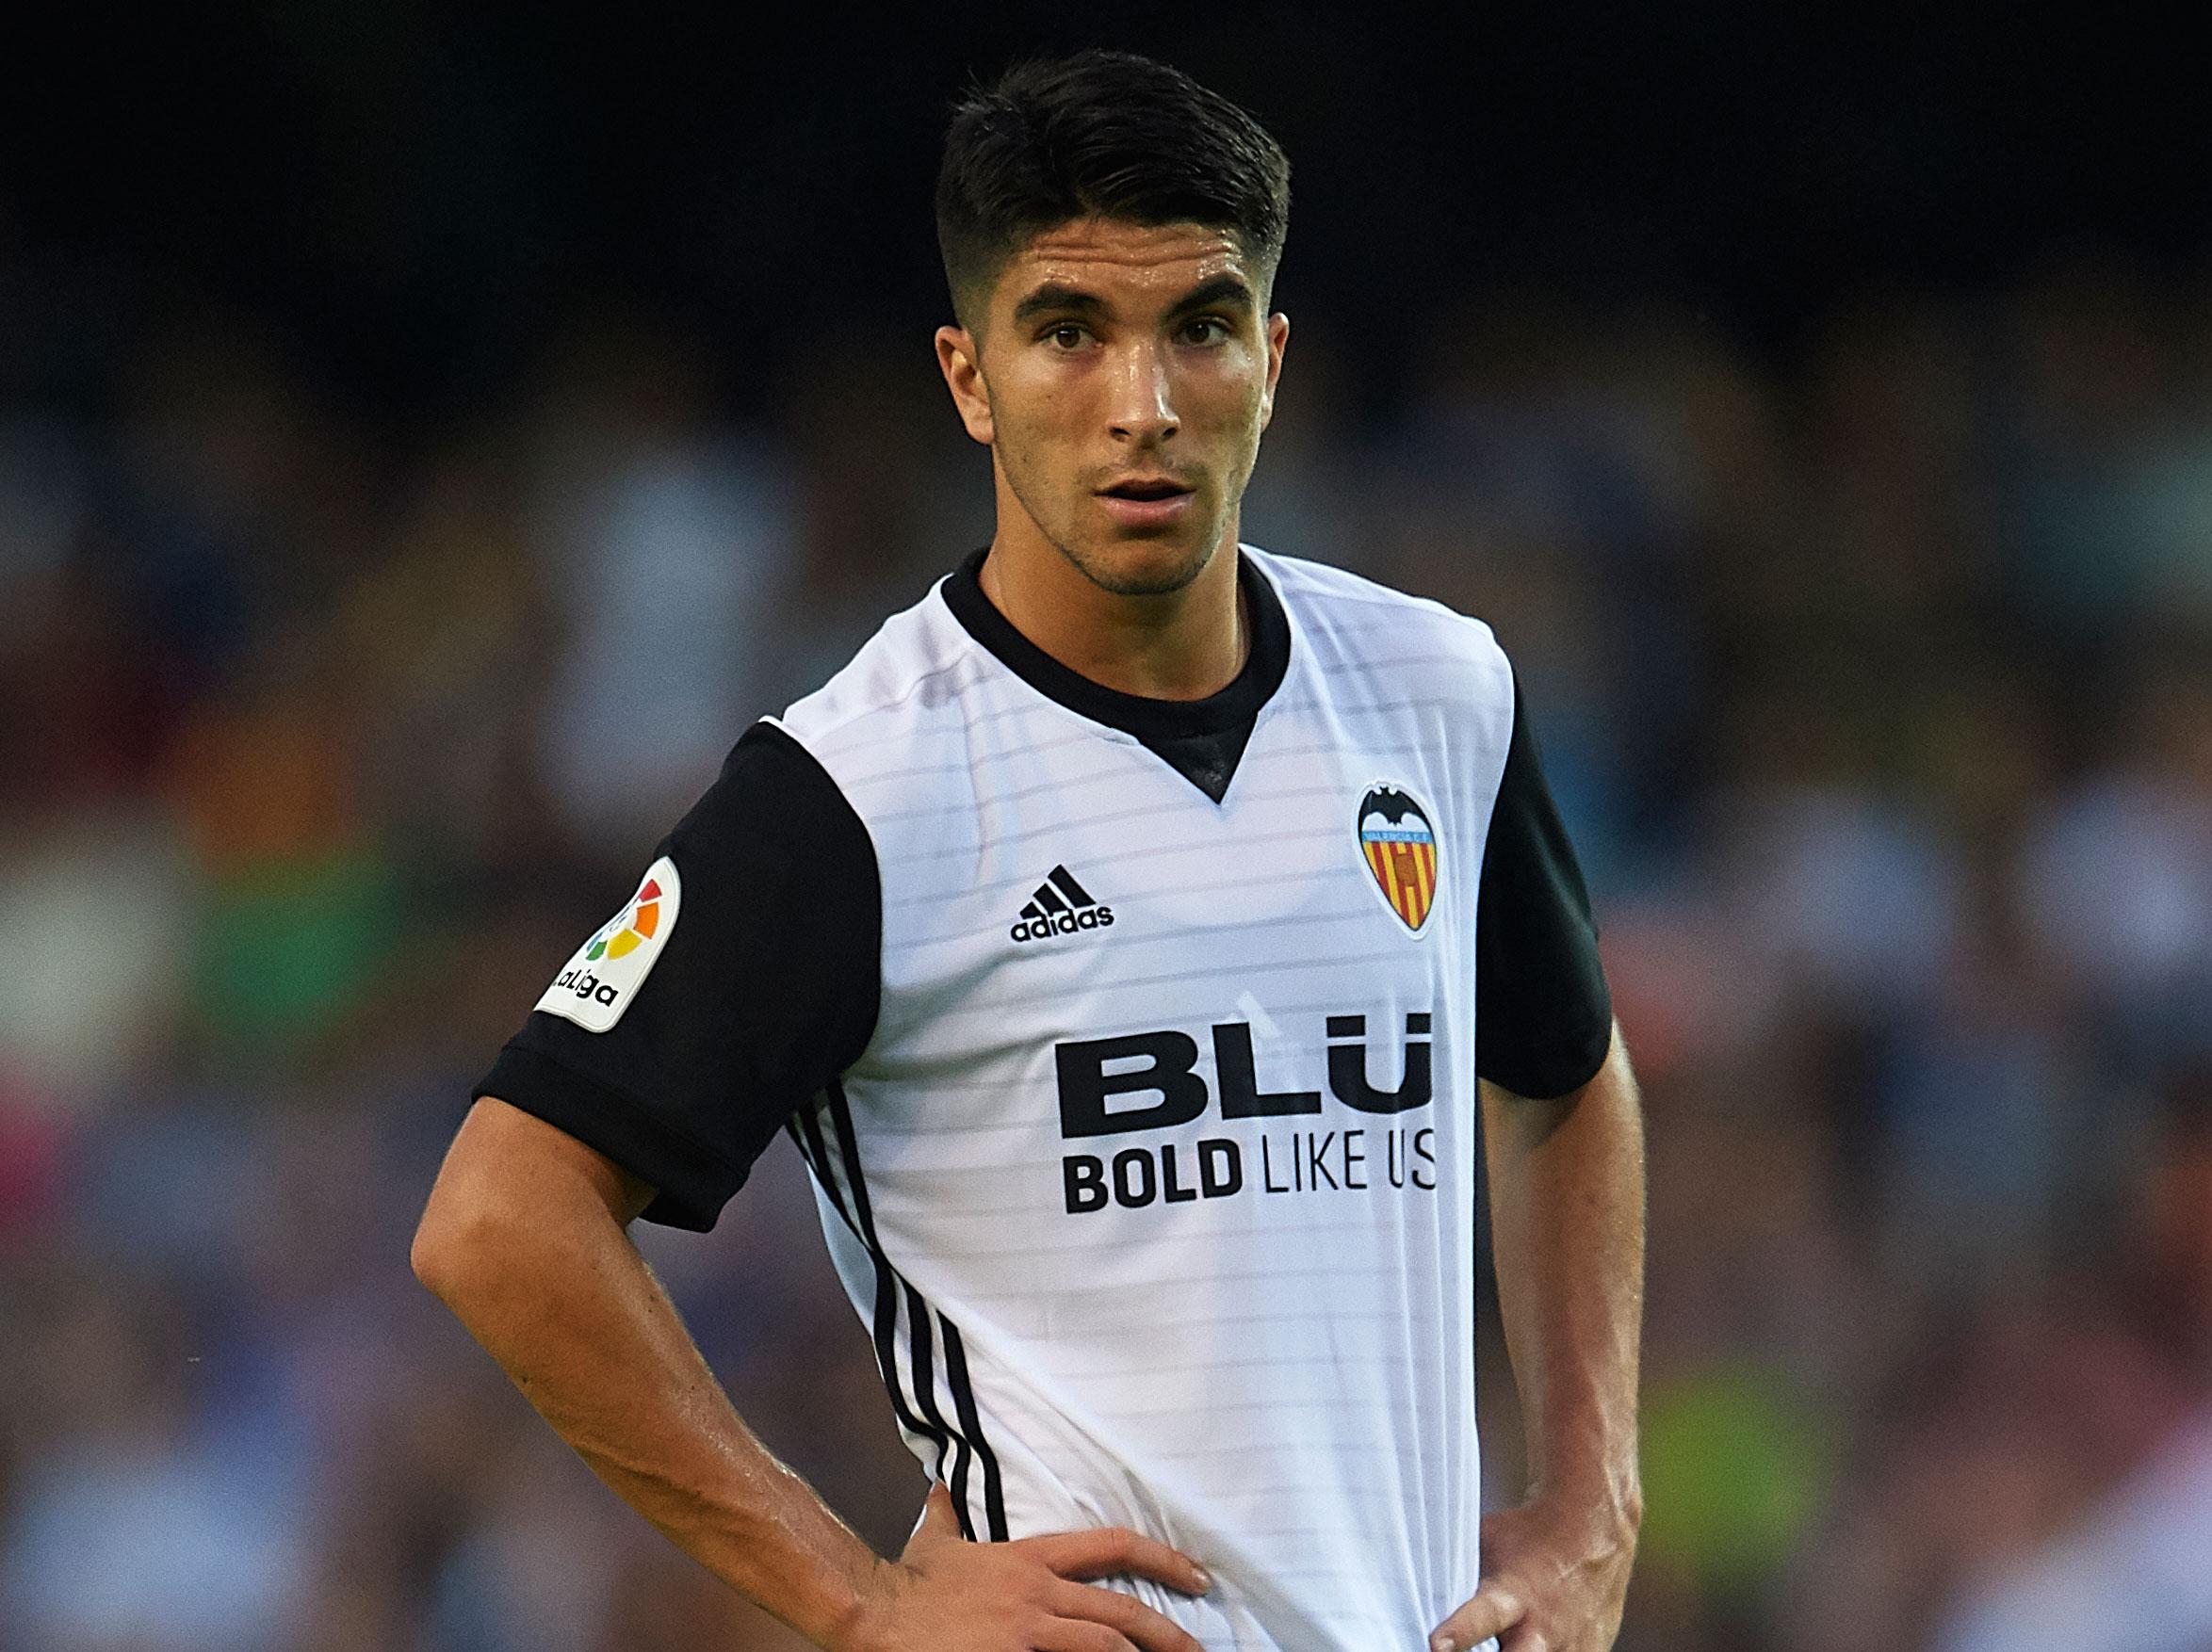 Jose Mourinho has identified Carlos Soler as his No 1 target in the January window